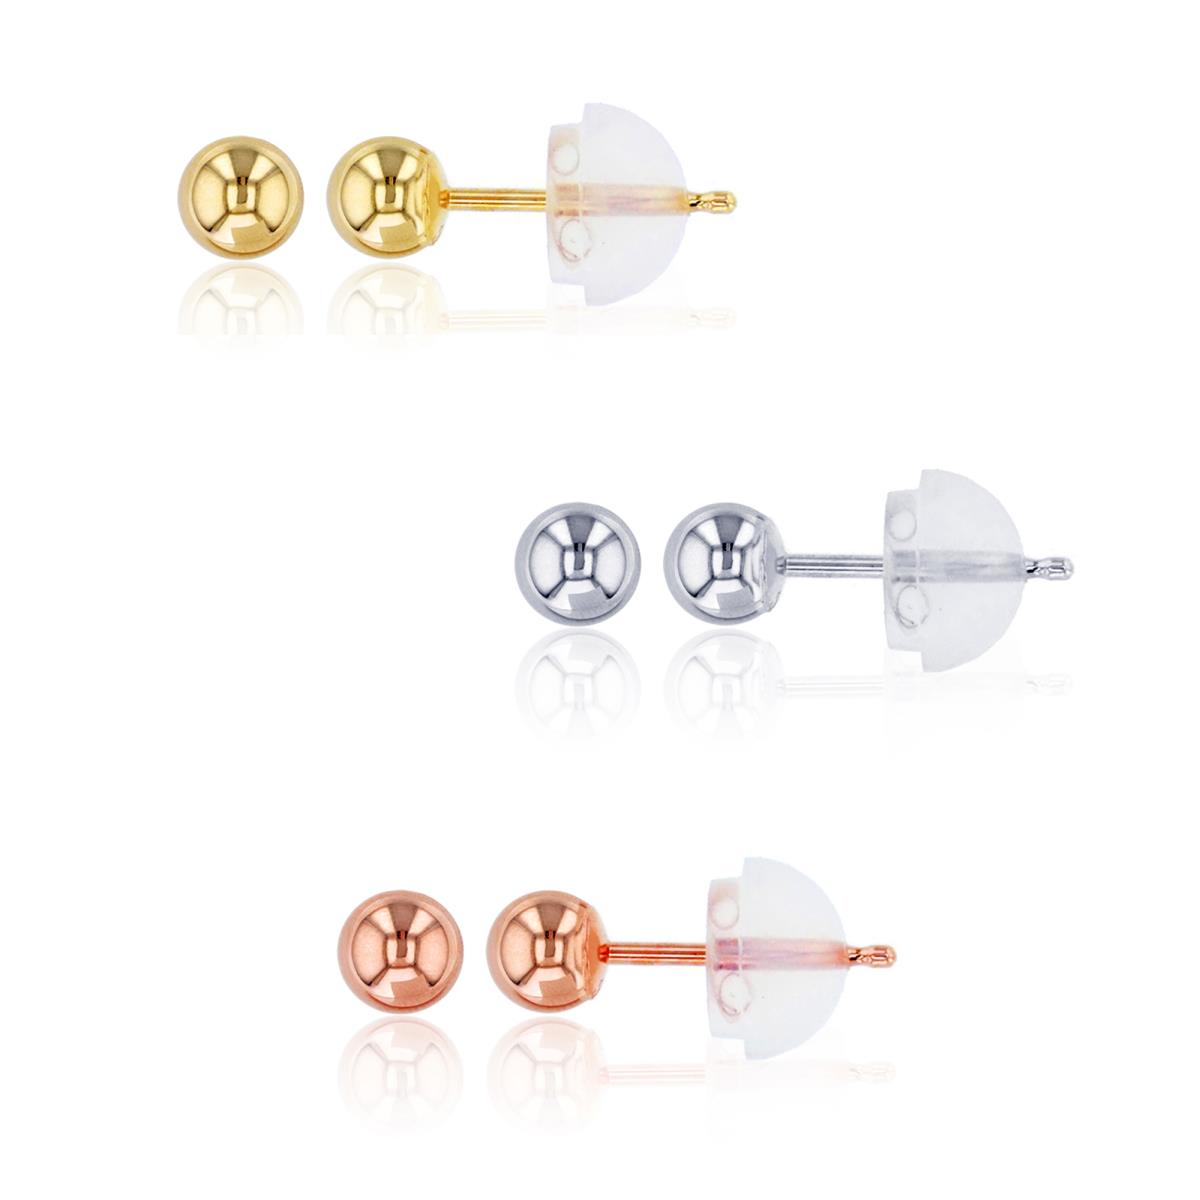 14K Tricolor 4MM YWR Ball Earring Stud Set with Silicone Backs